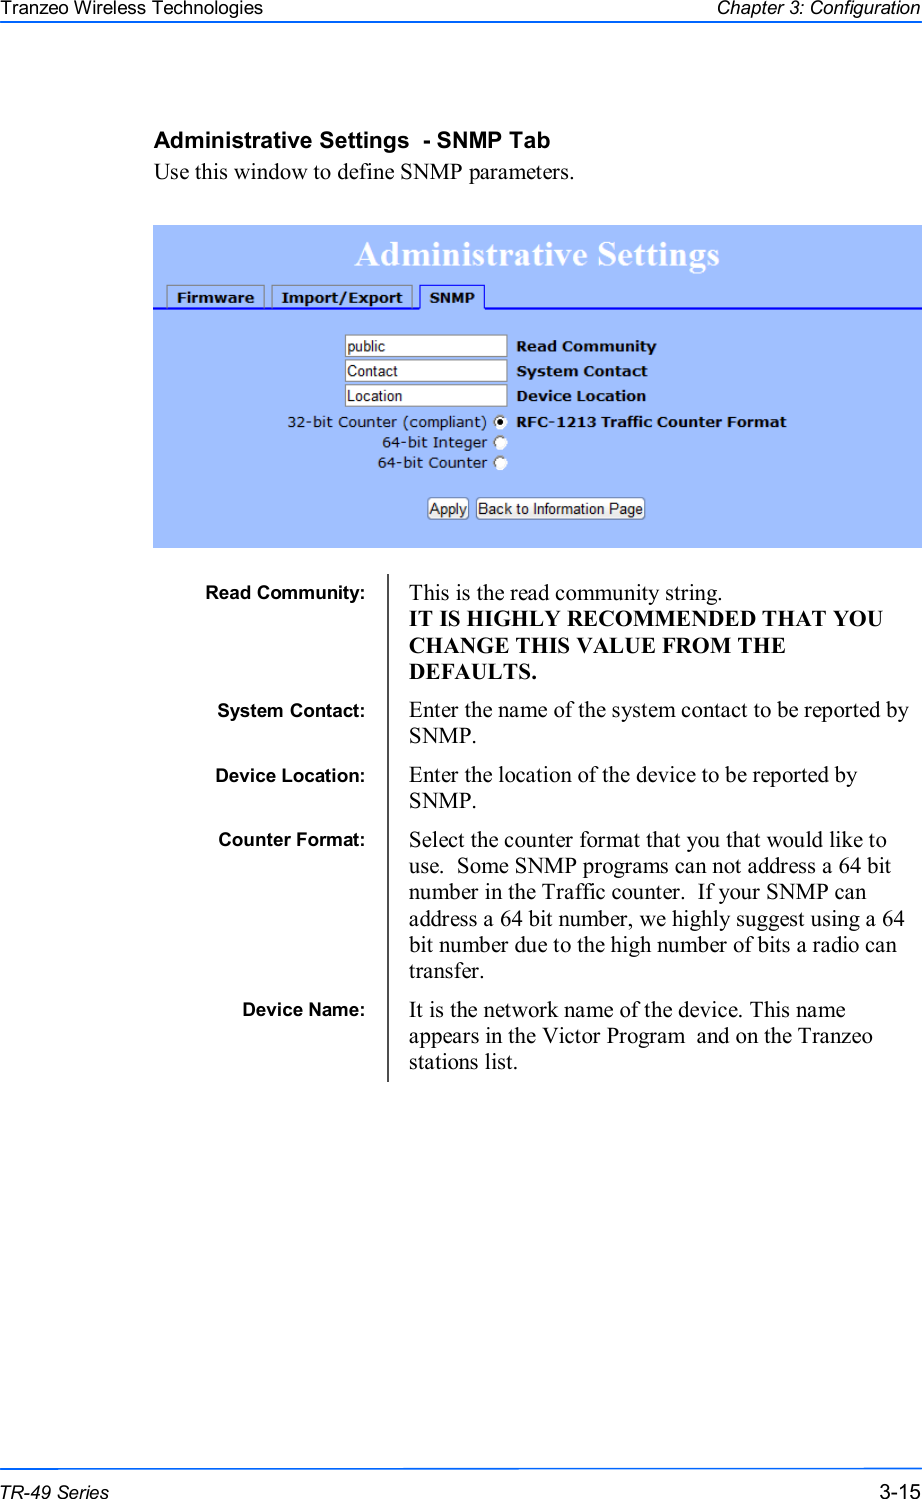  151515 This document is intended for Public Distribution                         19473 Fraser Way, Pitt Meadows, B.C. Canada V3Y  2V4 Chapter 3: Configuration 3-15 TR-49 Series Tranzeo Wireless Technologies Administrative Settings  - SNMP Tab Use this window to define SNMP parameters.   Read Community:  This is the read community string.   IT IS HIGHLY RECOMMENDED THAT YOU CHANGE THIS VALUE FROM THE DEFAULTS. System Contact:  Enter the name of the system contact to be reported by SNMP. Device Location:  Enter the location of the device to be reported by SNMP. Counter Format:  Select the counter format that you that would like to use.  Some SNMP programs can not address a 64 bit number in the Traffic counter.  If your SNMP can address a 64 bit number, we highly suggest using a 64 bit number due to the high number of bits a radio can transfer. Device Name:  It is the network name of the device. This name appears in the Victor Program  and on the Tranzeo stations list. 